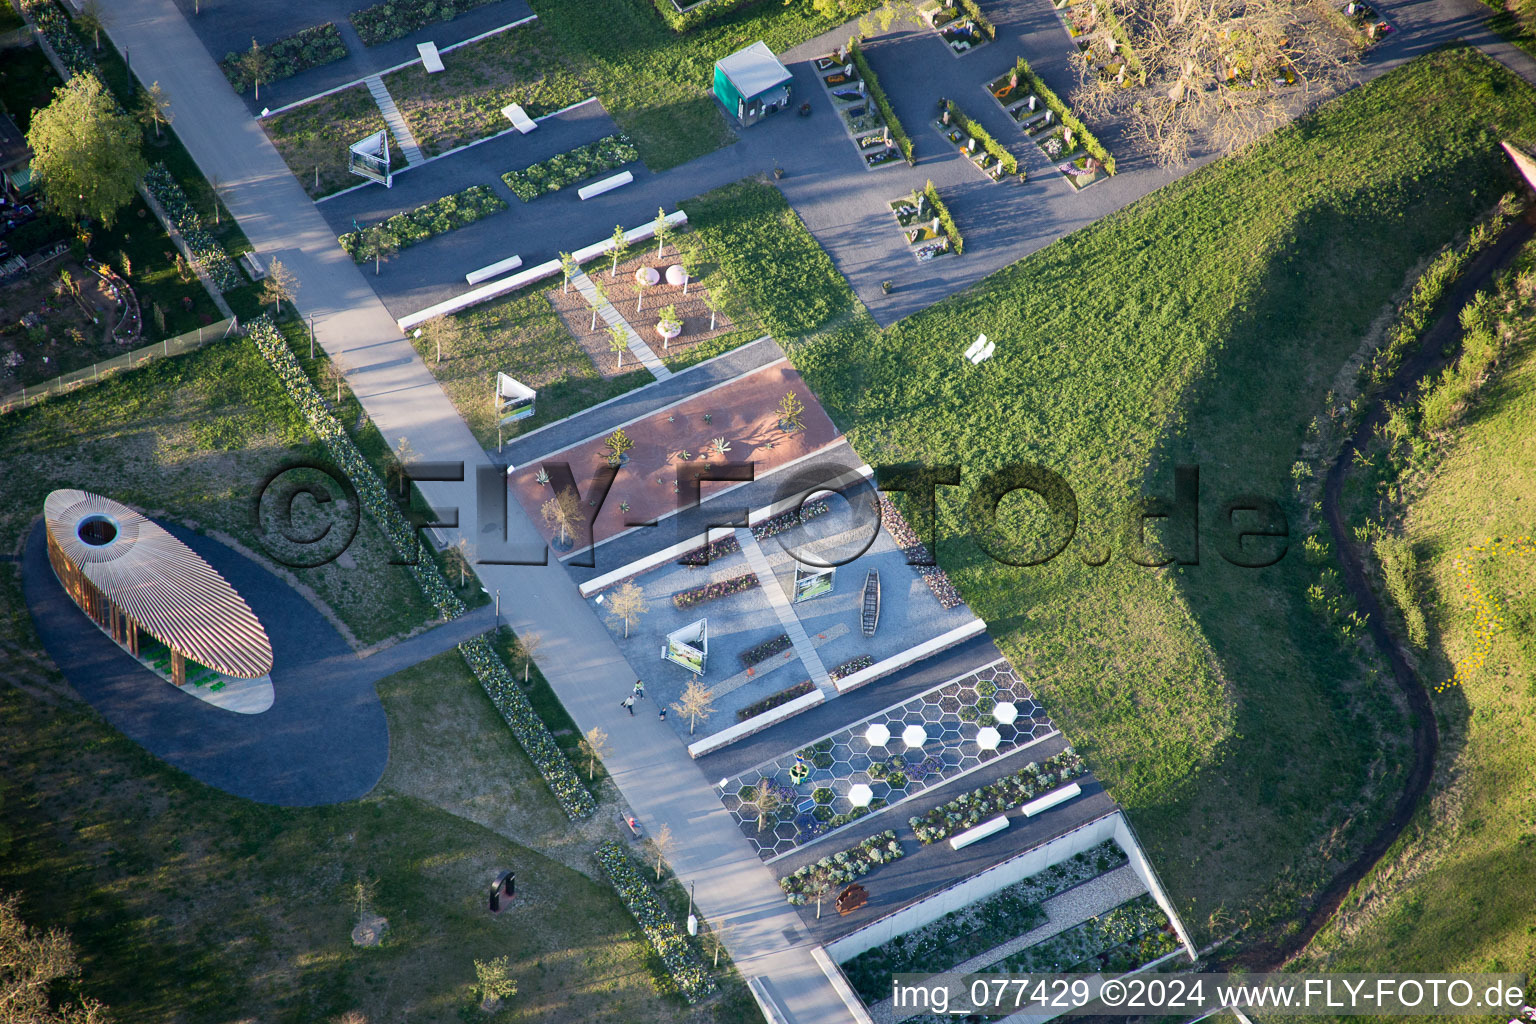 State Garden Show 2015 in Landau in der Pfalz in the state Rhineland-Palatinate, Germany viewn from the air